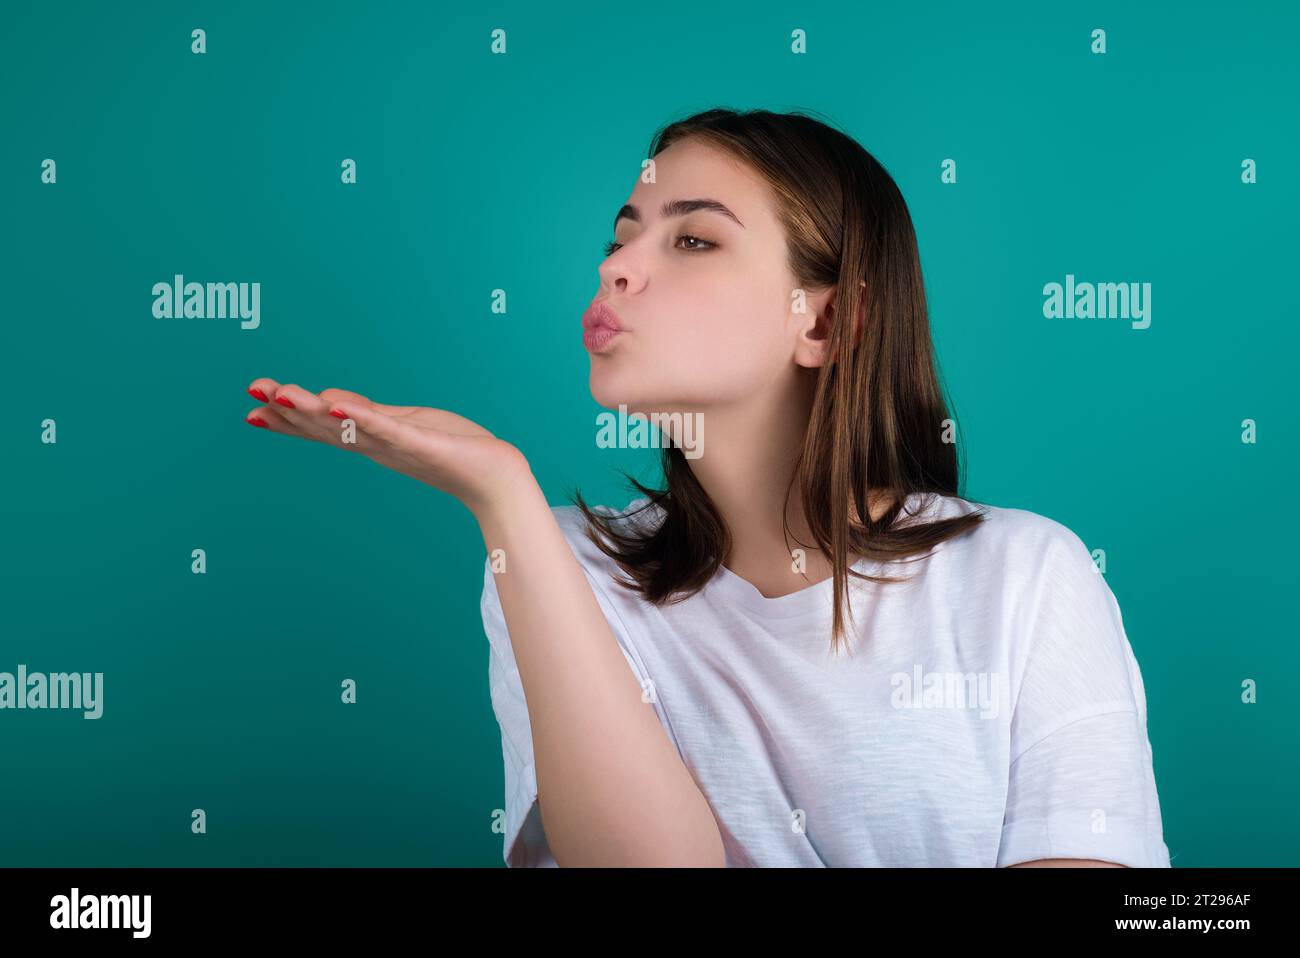 Blowing lips sending sweet air kiss. Lovely girl sending blowing kiss with pout lips isolated on studio background. Affection feelings. Portrait Stock Photo